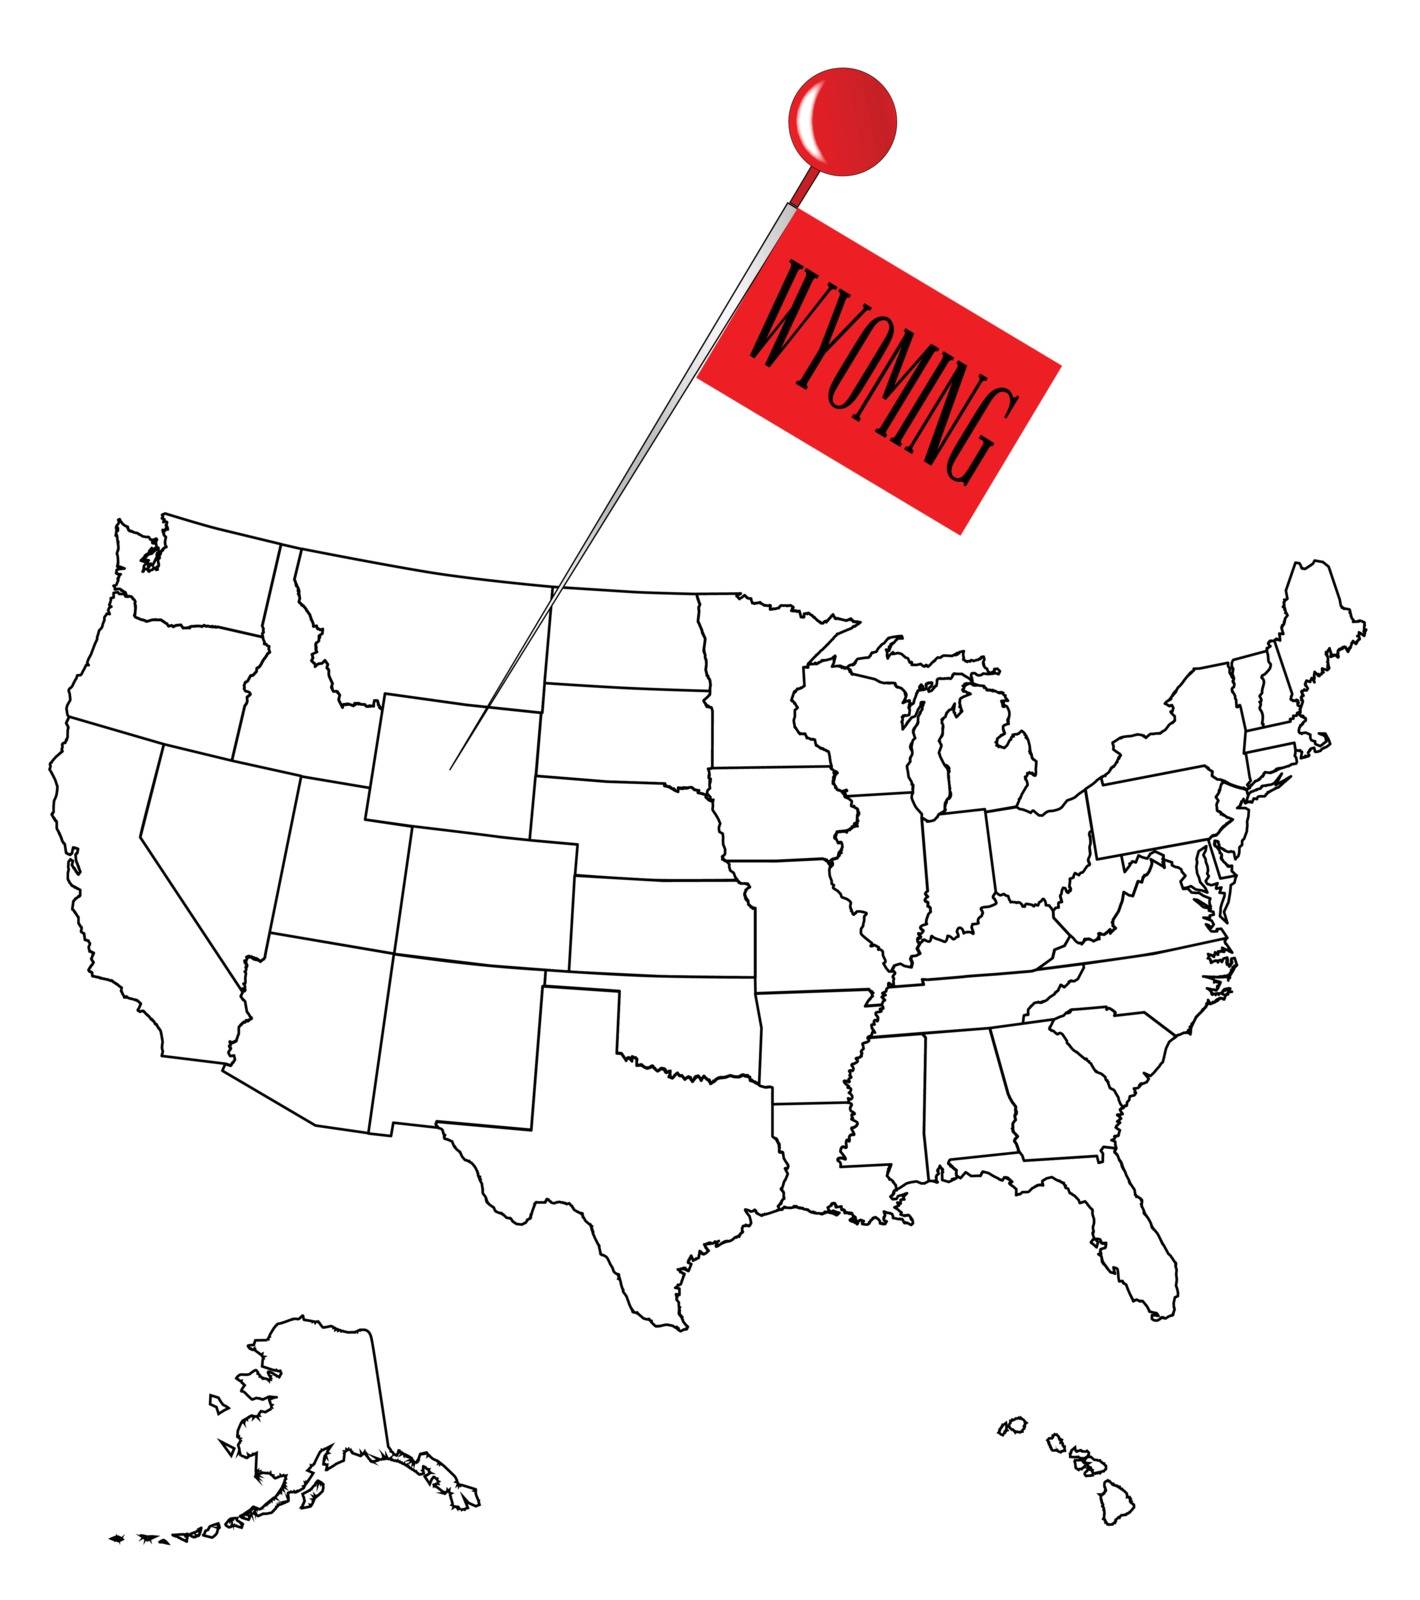 An outline map of USA with a knob pin in the state of Wyoming